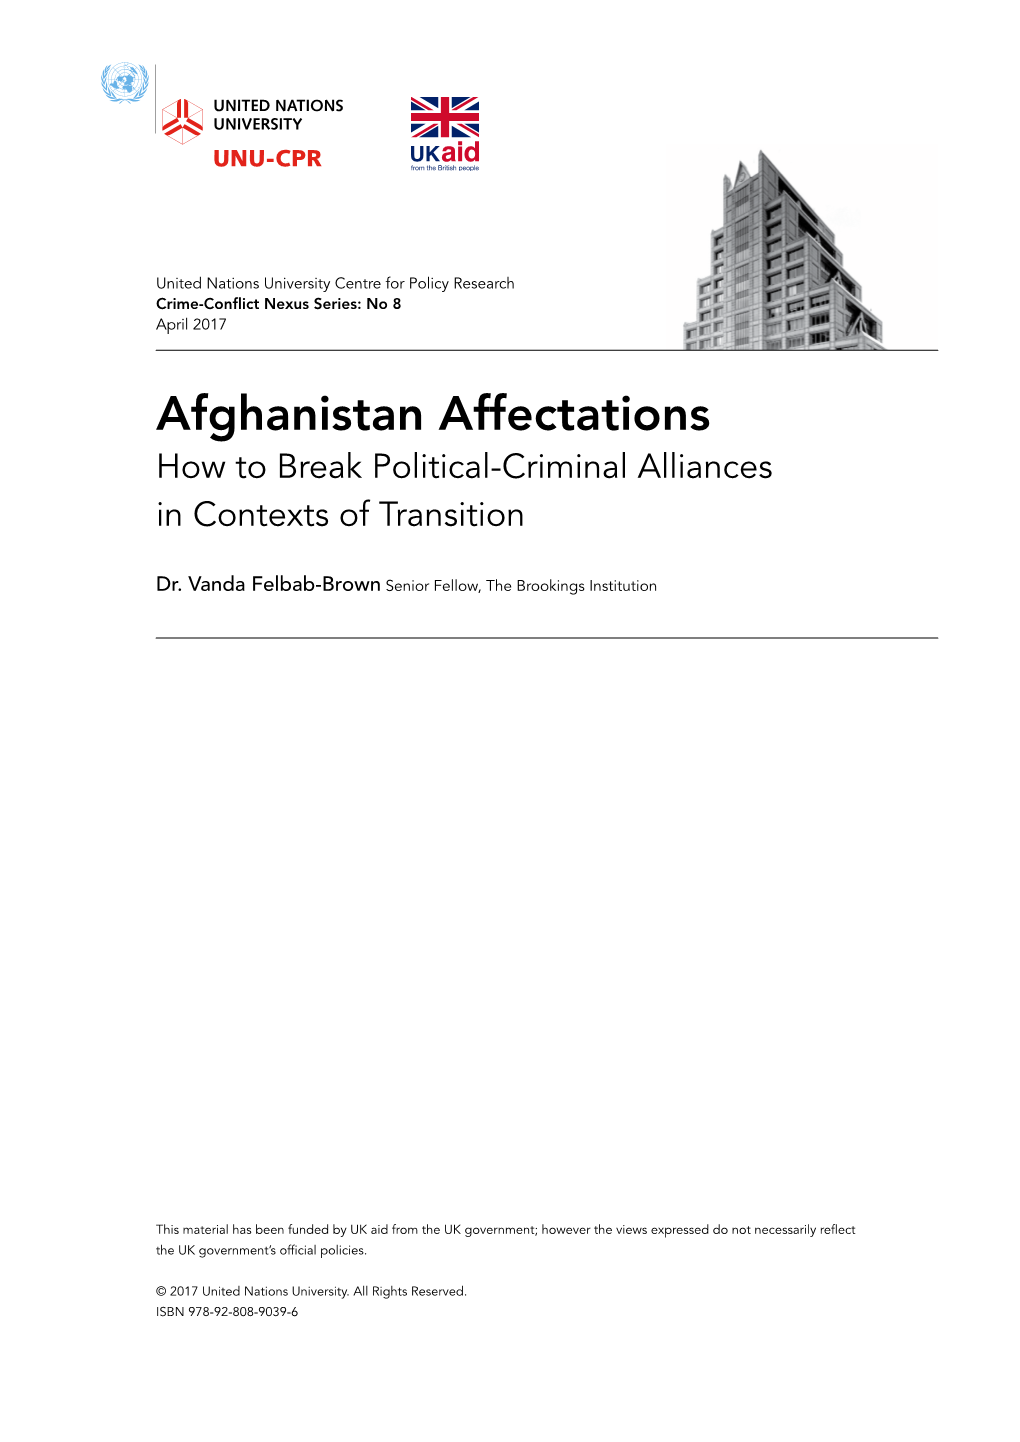 Afghanistan Affectations How to Break Political-Criminal Alliances in Contexts of Transition